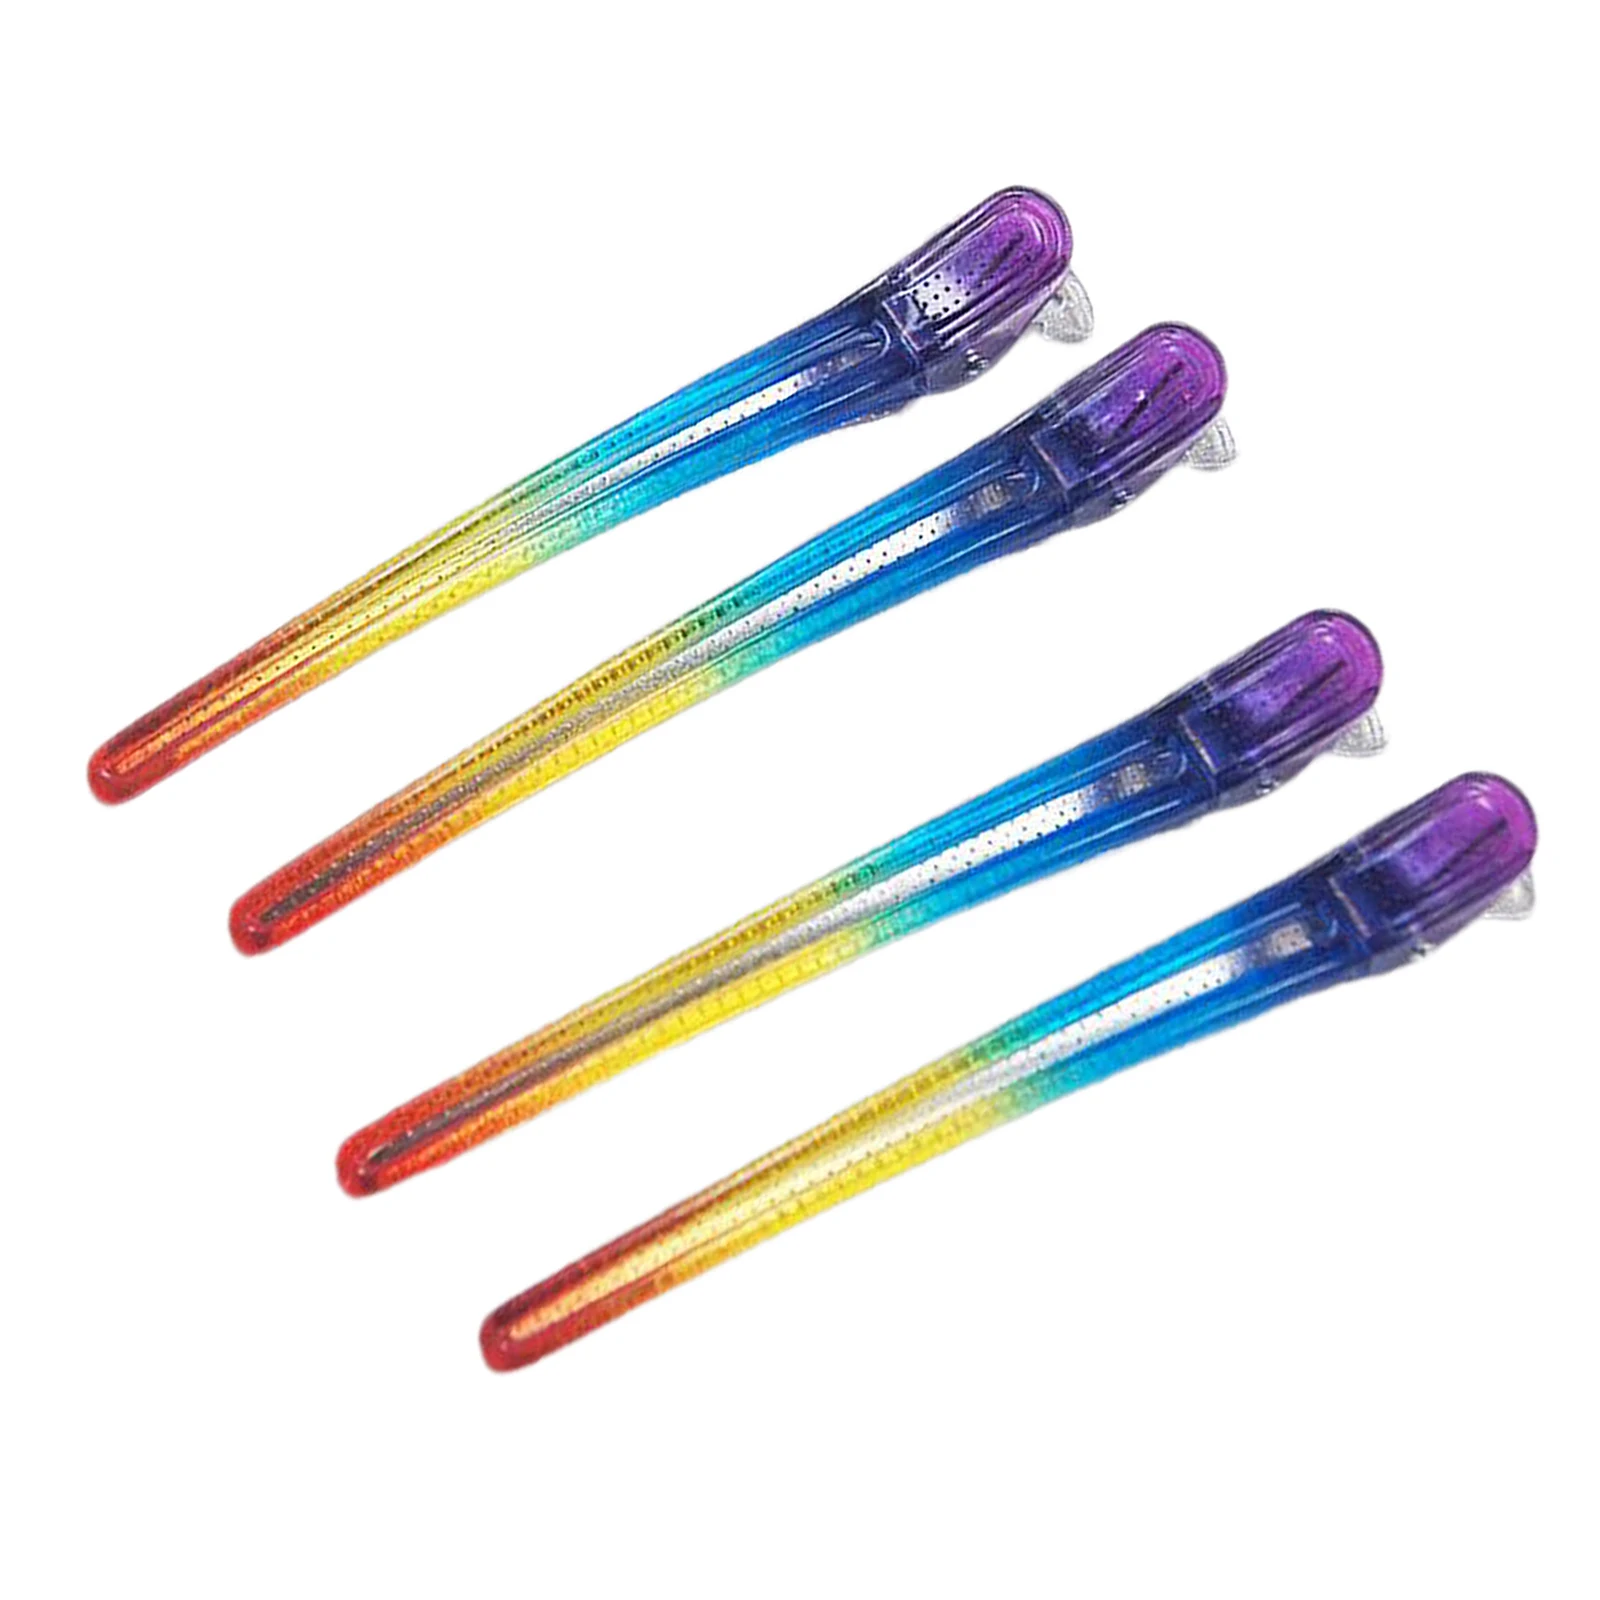 4pcs Pro Hairdressing Duck Billa Crocodile Clips Dyeing Hair Clips